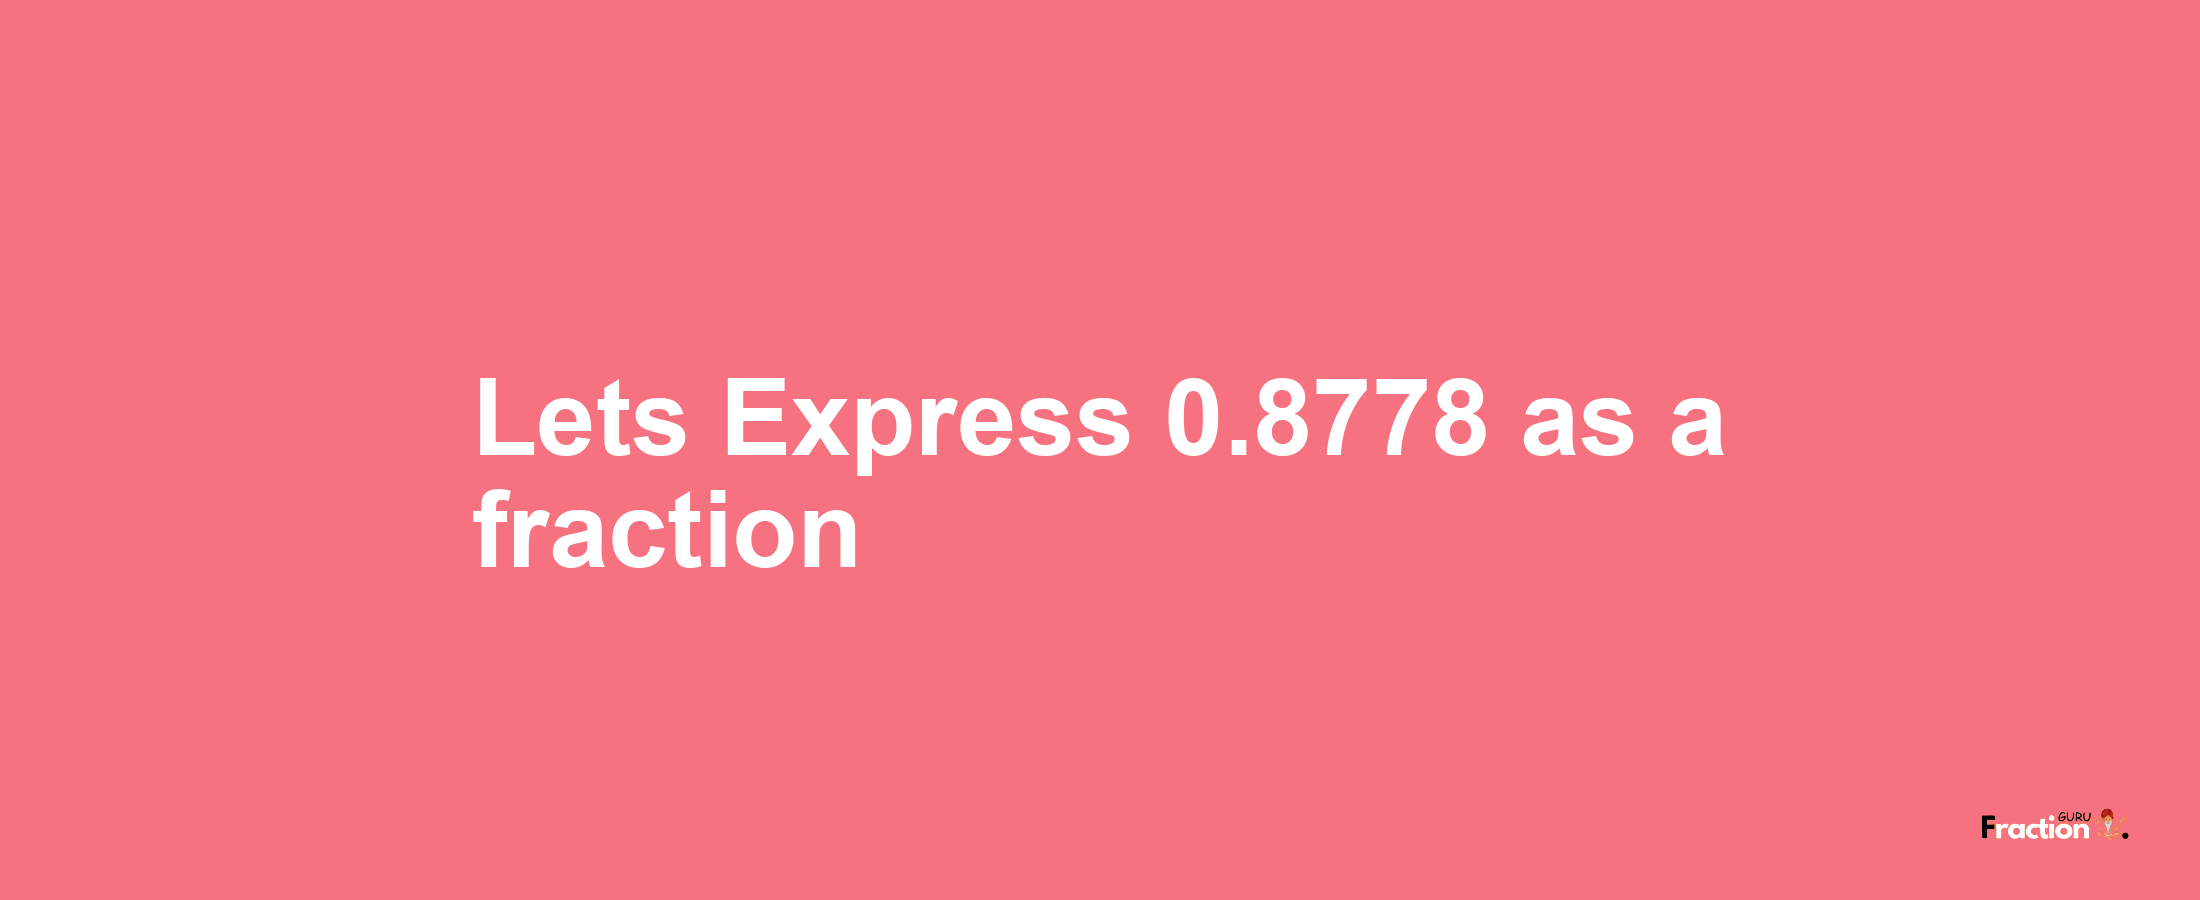 Lets Express 0.8778 as afraction